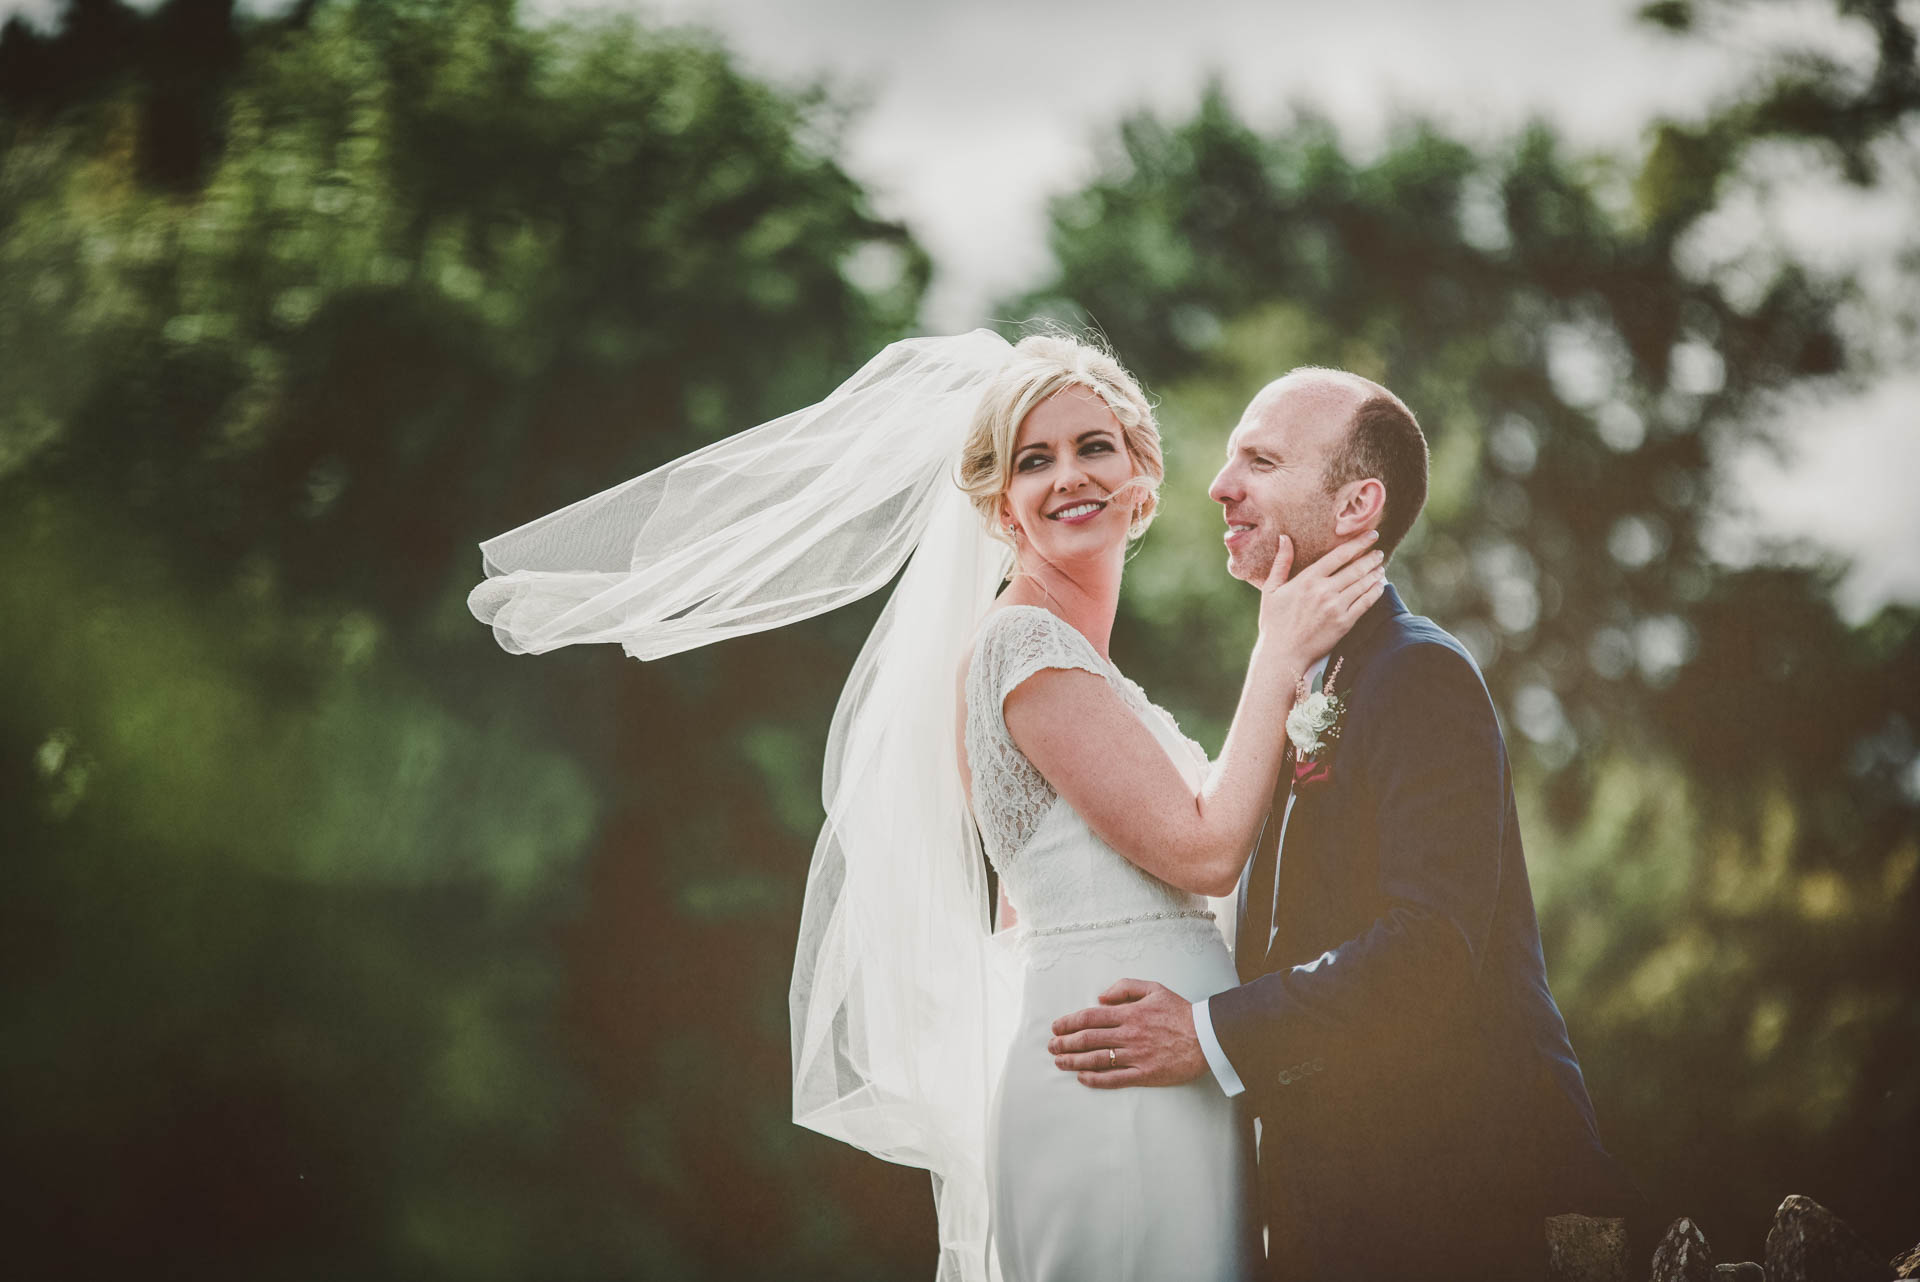 Marie&Patrick Wedding Day – Killarney 26.08.2016 (reportage of the wedding as second photographer)